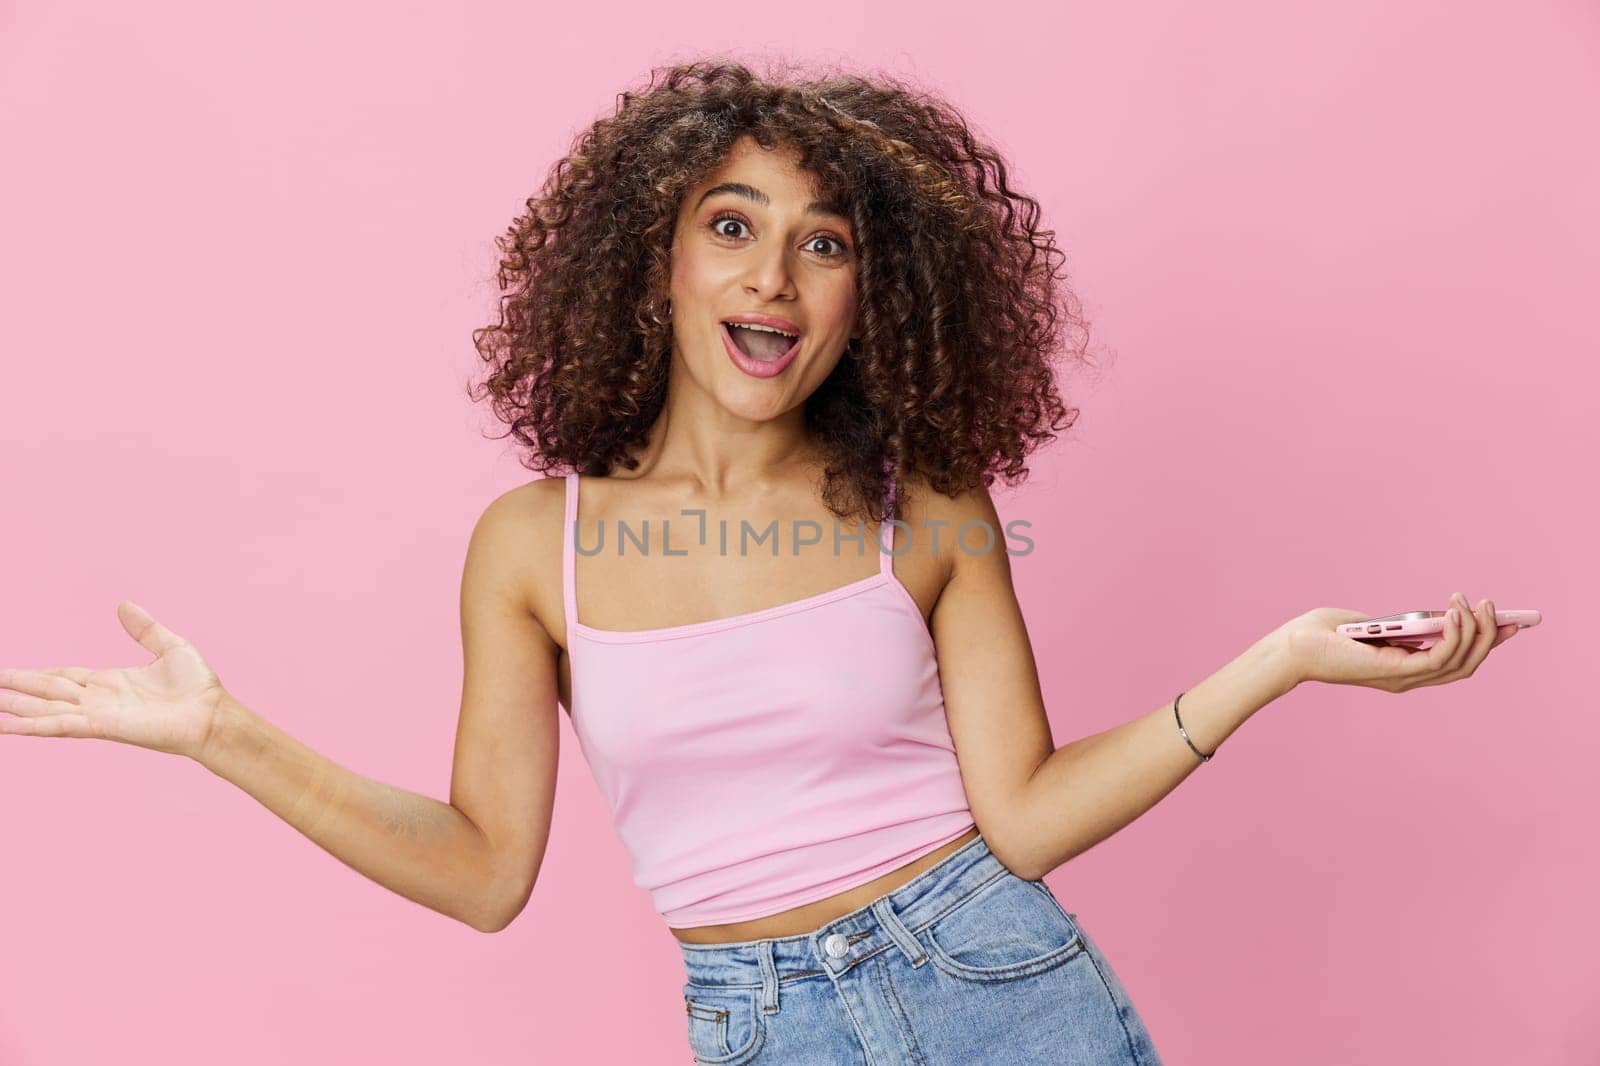 Woman blogger holding phone with curly hair in pink top and jeans poses on pink background, copy space, technology and social media. High quality photo